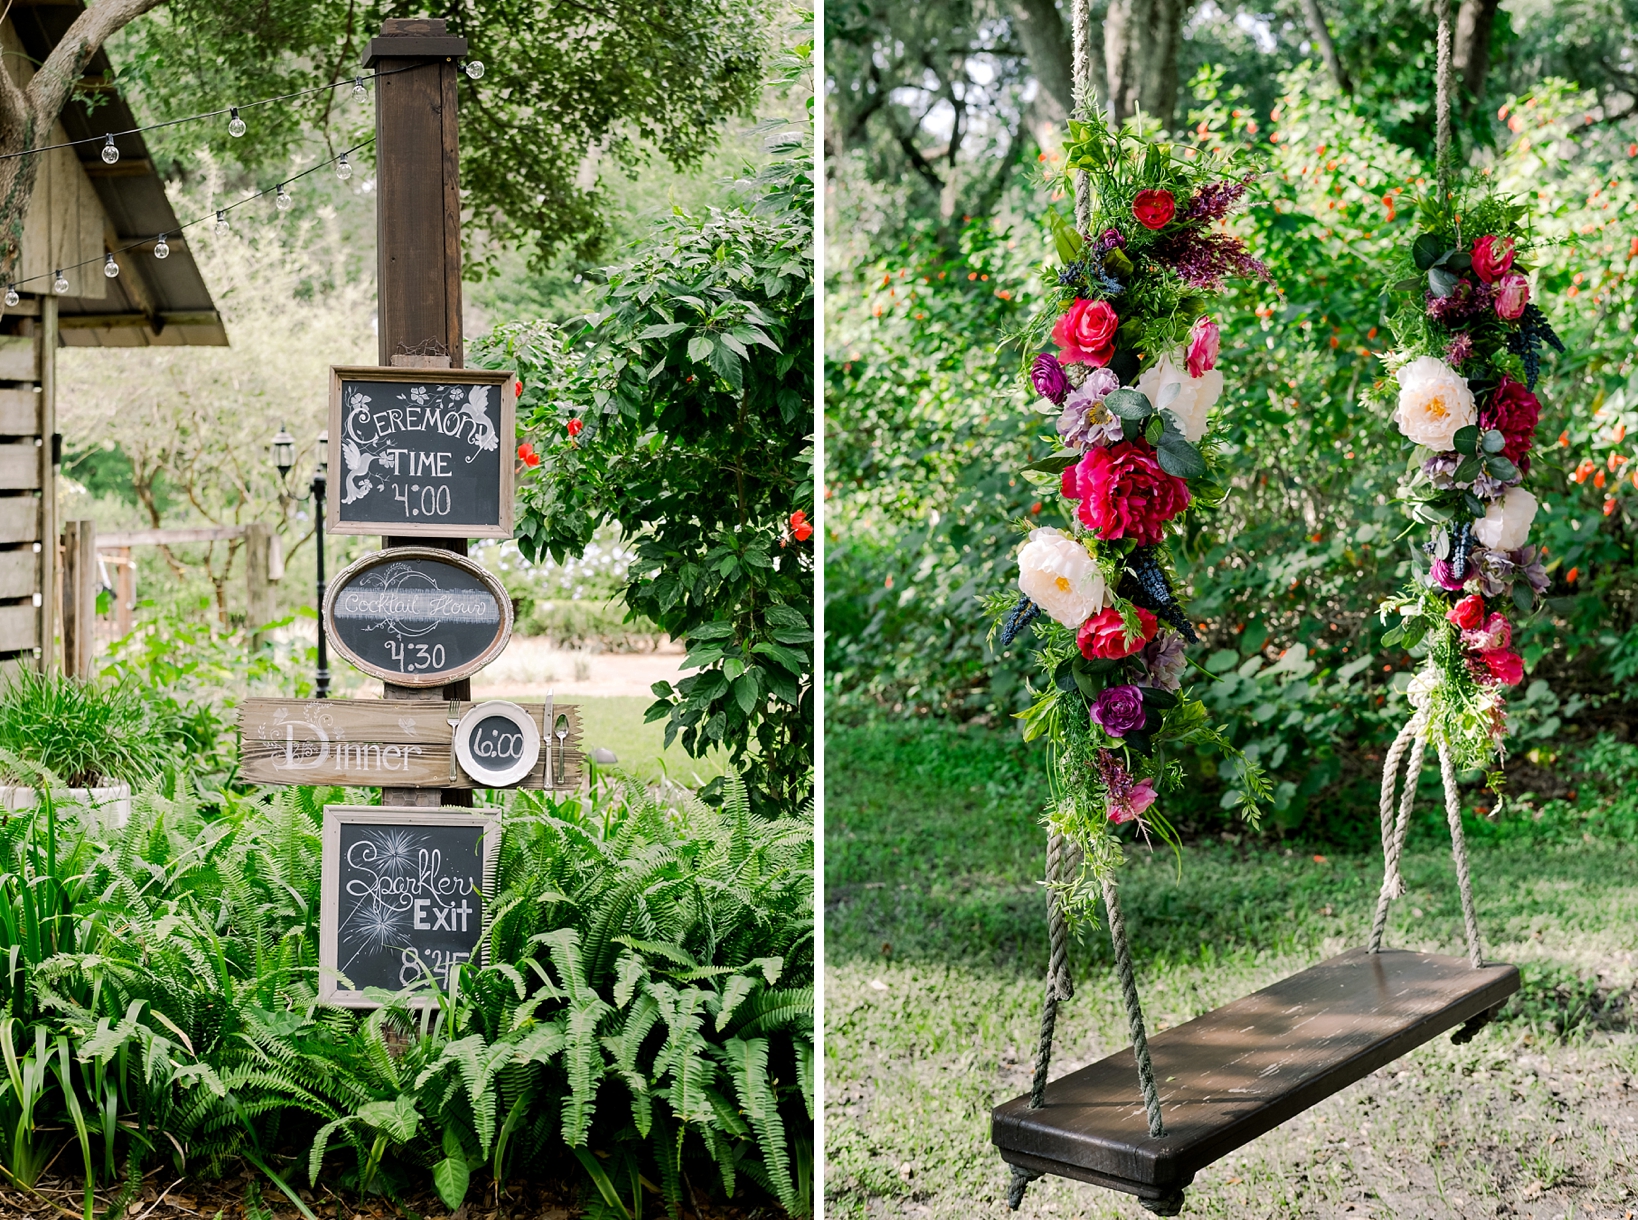 Wedding decor around the cross creek wedding venue including a floral tree swing and chalkboard signs